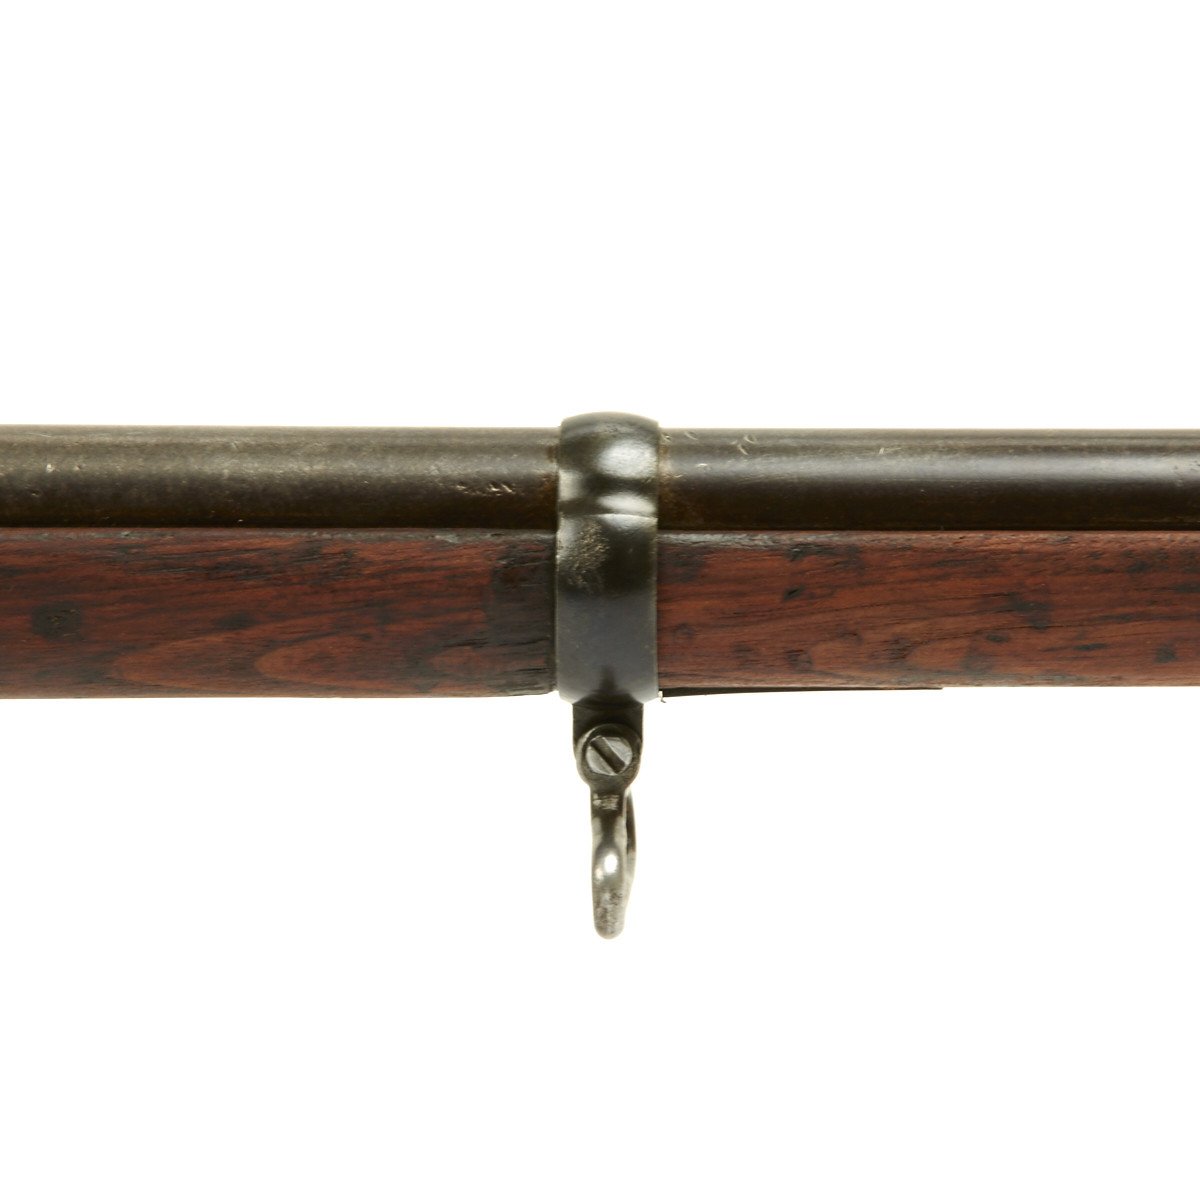 spencer repeating rifle serial numbers